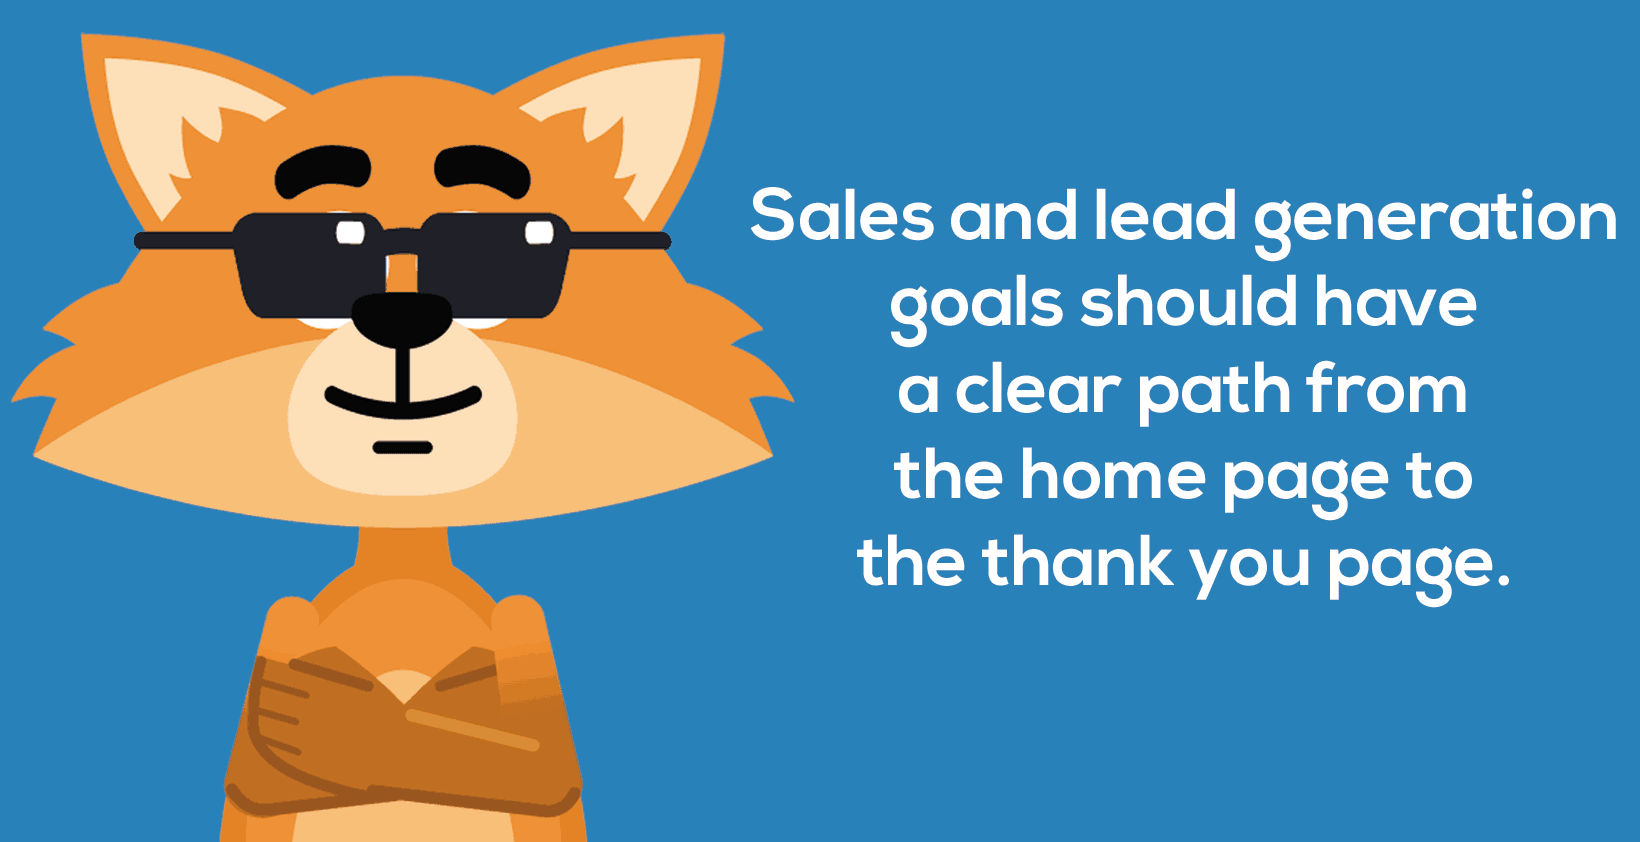 Sales and lead generation goals should have a clear path from the home page to the thank you page.